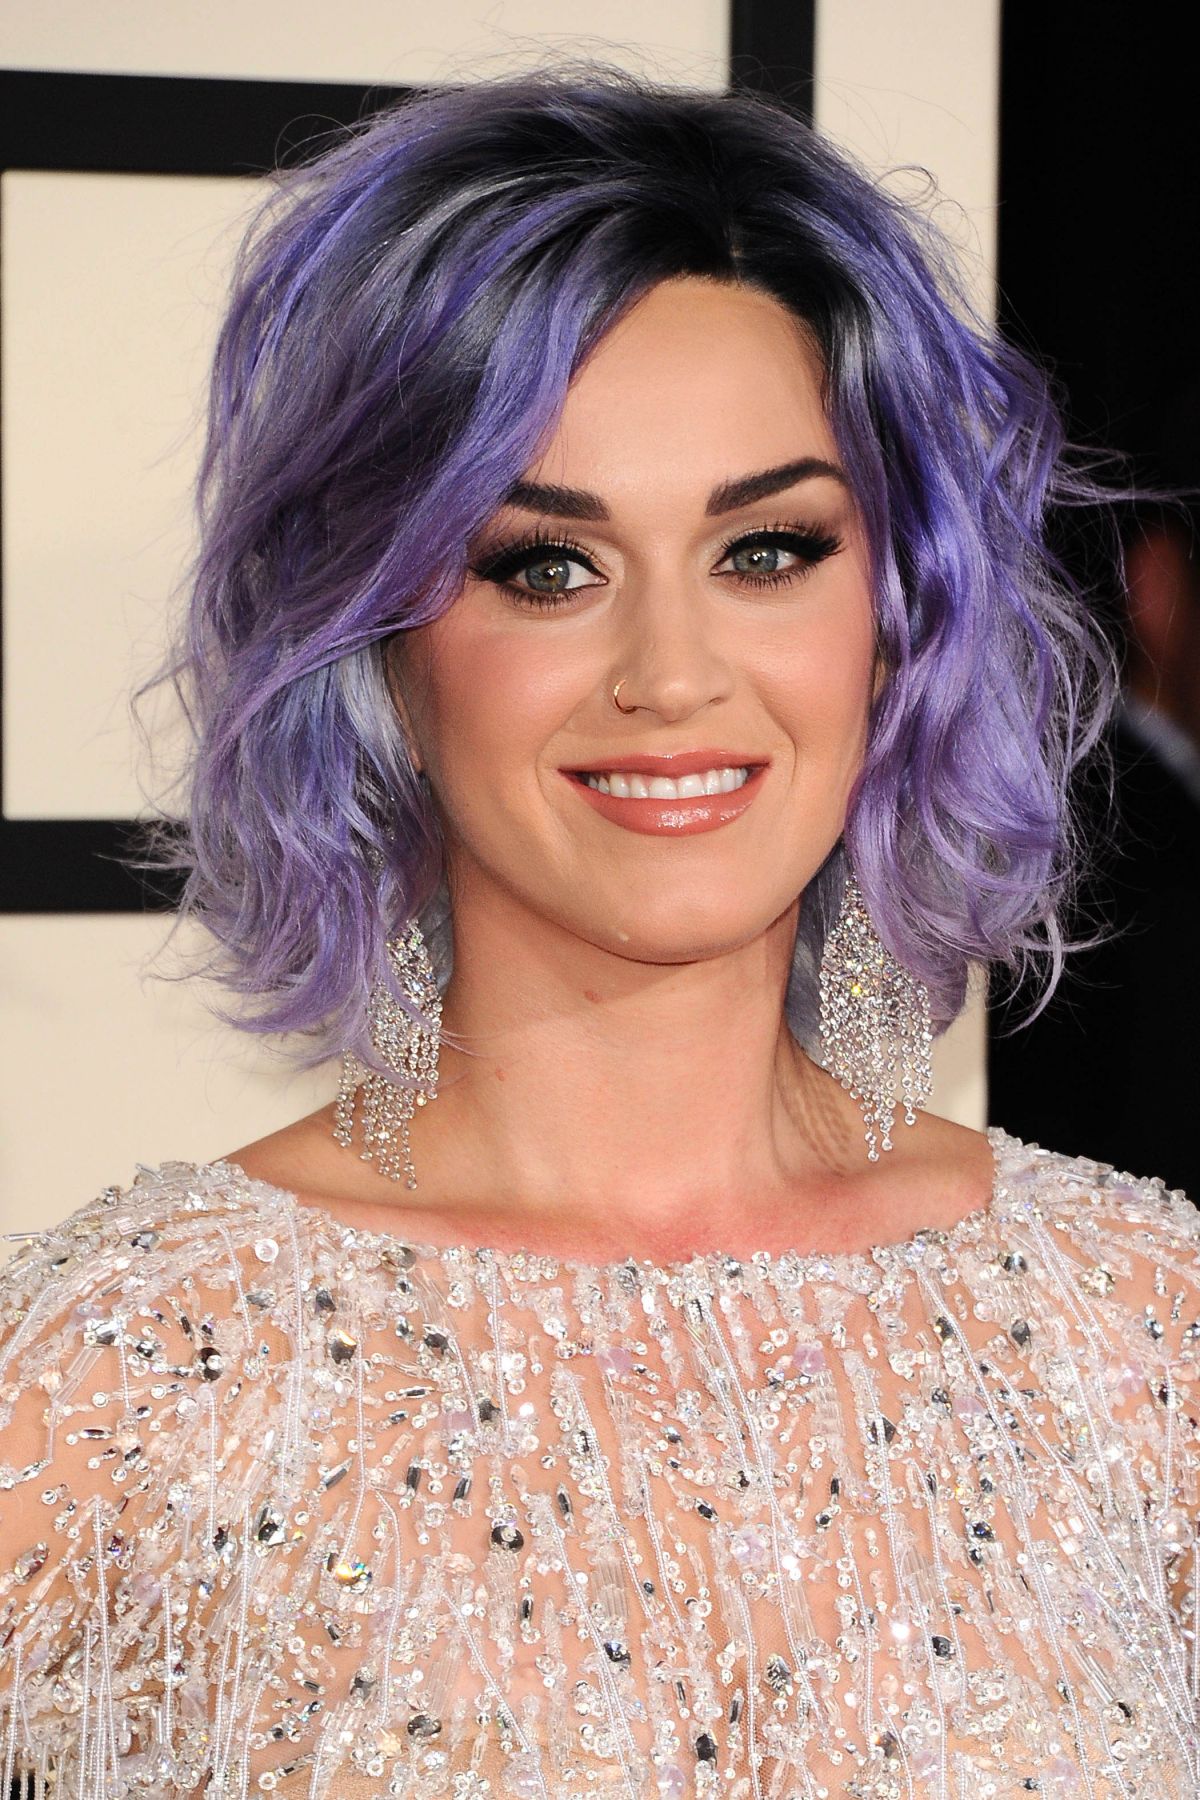 KATY PERRY at 2015 Grammy Awards in Los Angeles - HawtCelebs